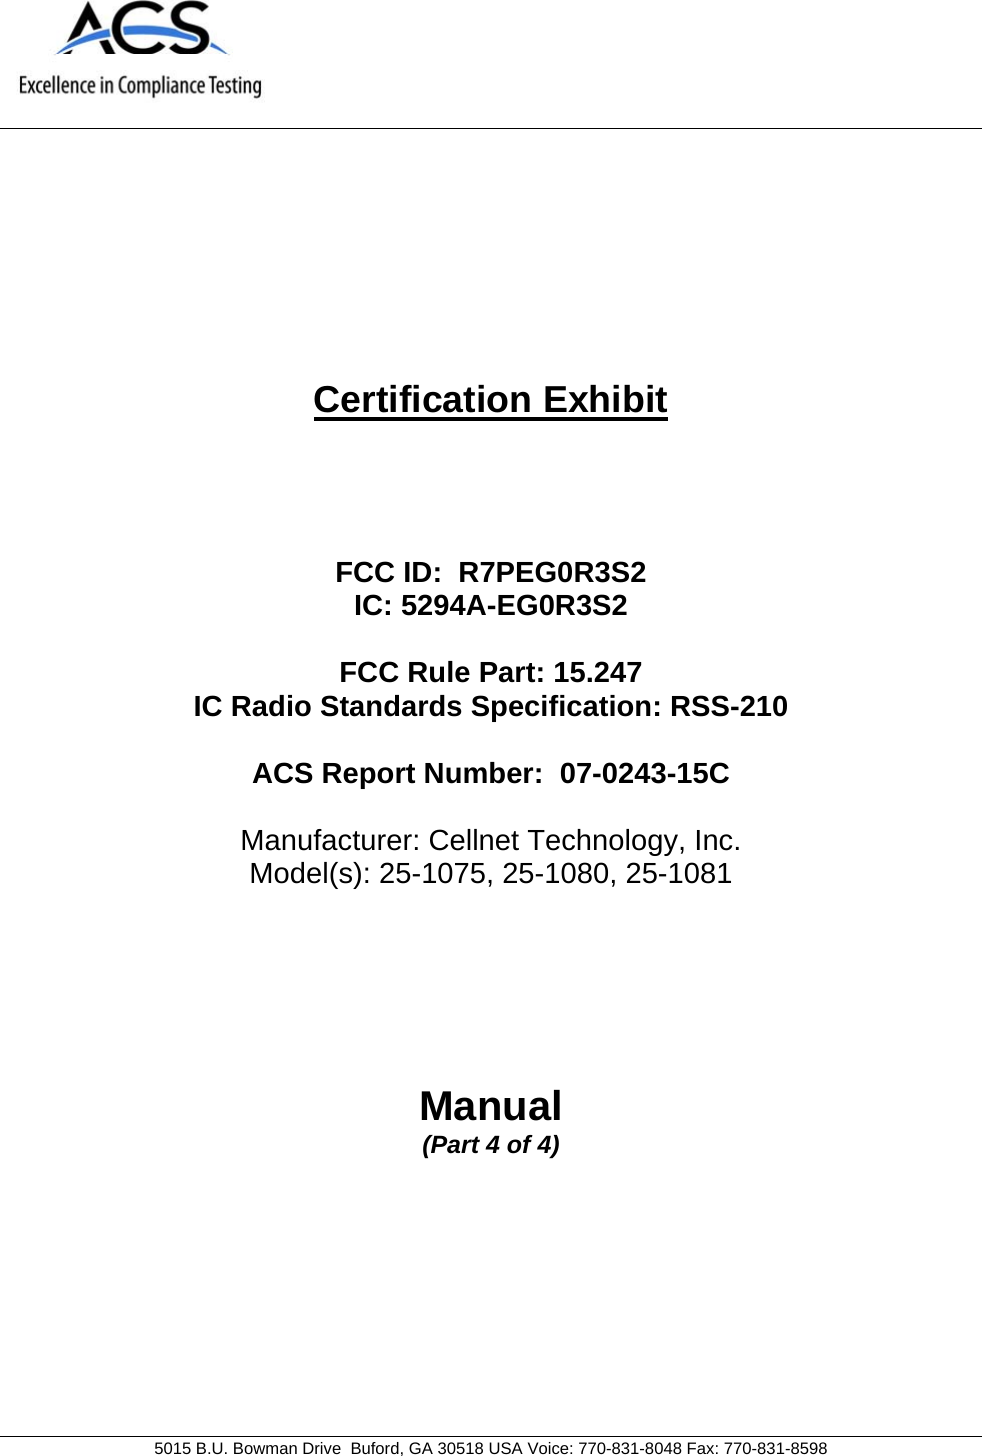     5015 B.U. Bowman Drive  Buford, GA 30518 USA Voice: 770-831-8048 Fax: 770-831-8598   Certification Exhibit     FCC ID:  R7PEG0R3S2 IC: 5294A-EG0R3S2  FCC Rule Part: 15.247 IC Radio Standards Specification: RSS-210  ACS Report Number:  07-0243-15C   Manufacturer: Cellnet Technology, Inc. Model(s): 25-1075, 25-1080, 25-1081     Manual (Part 4 of 4)  